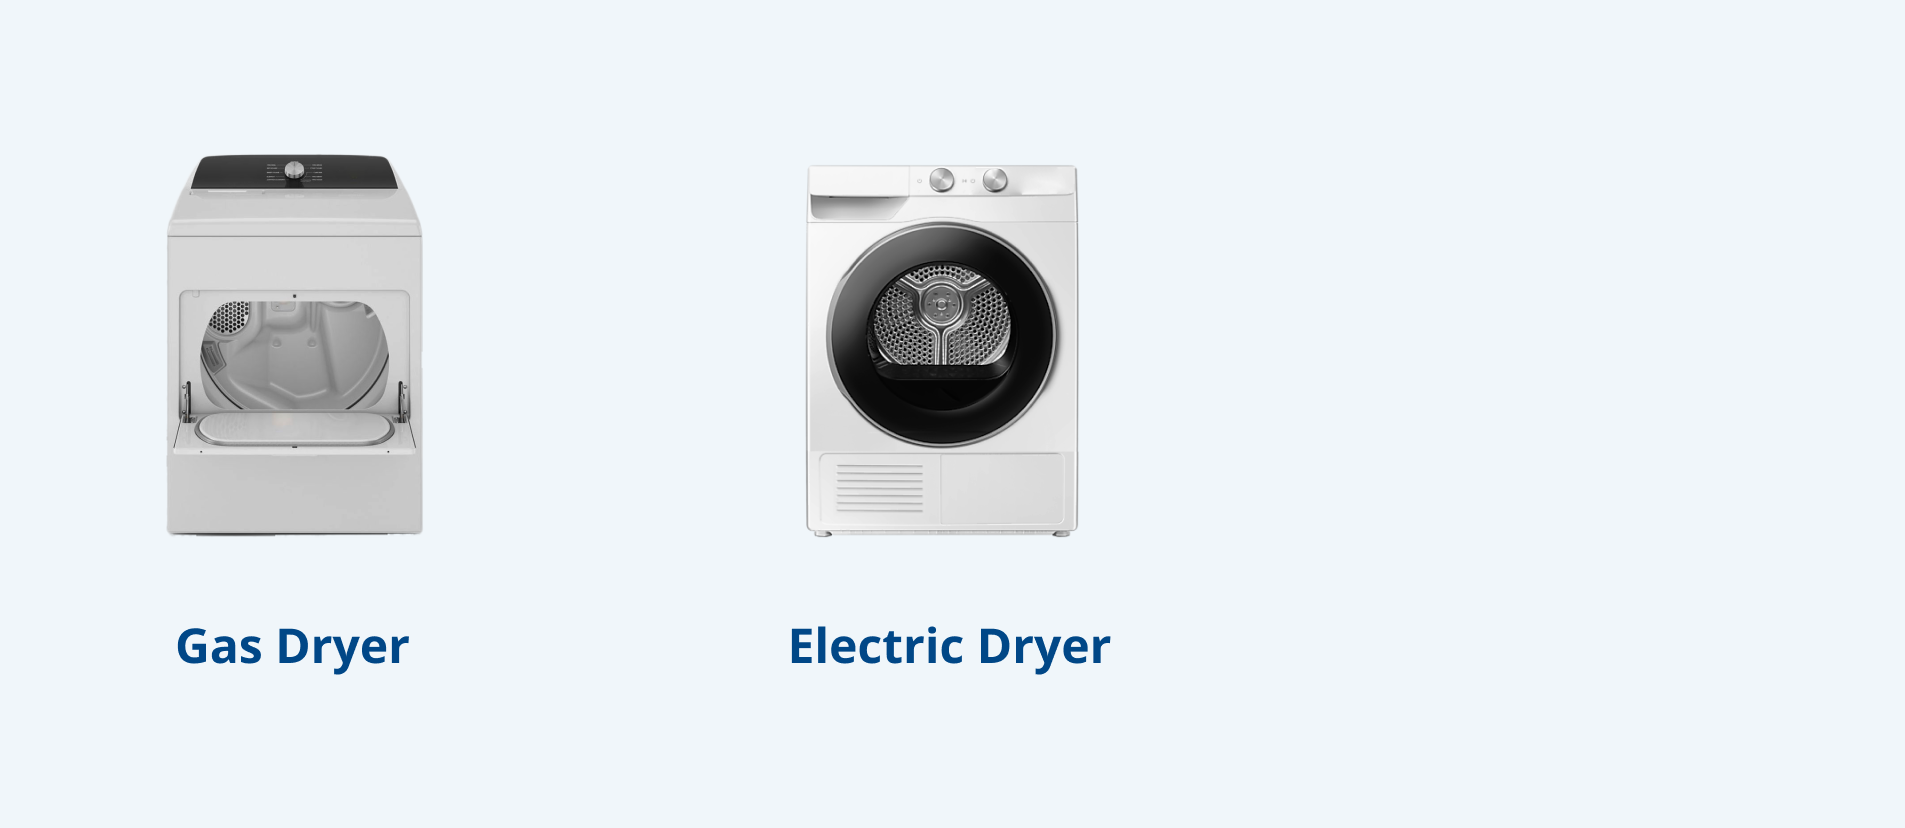 24 hour dryer repairs in my area